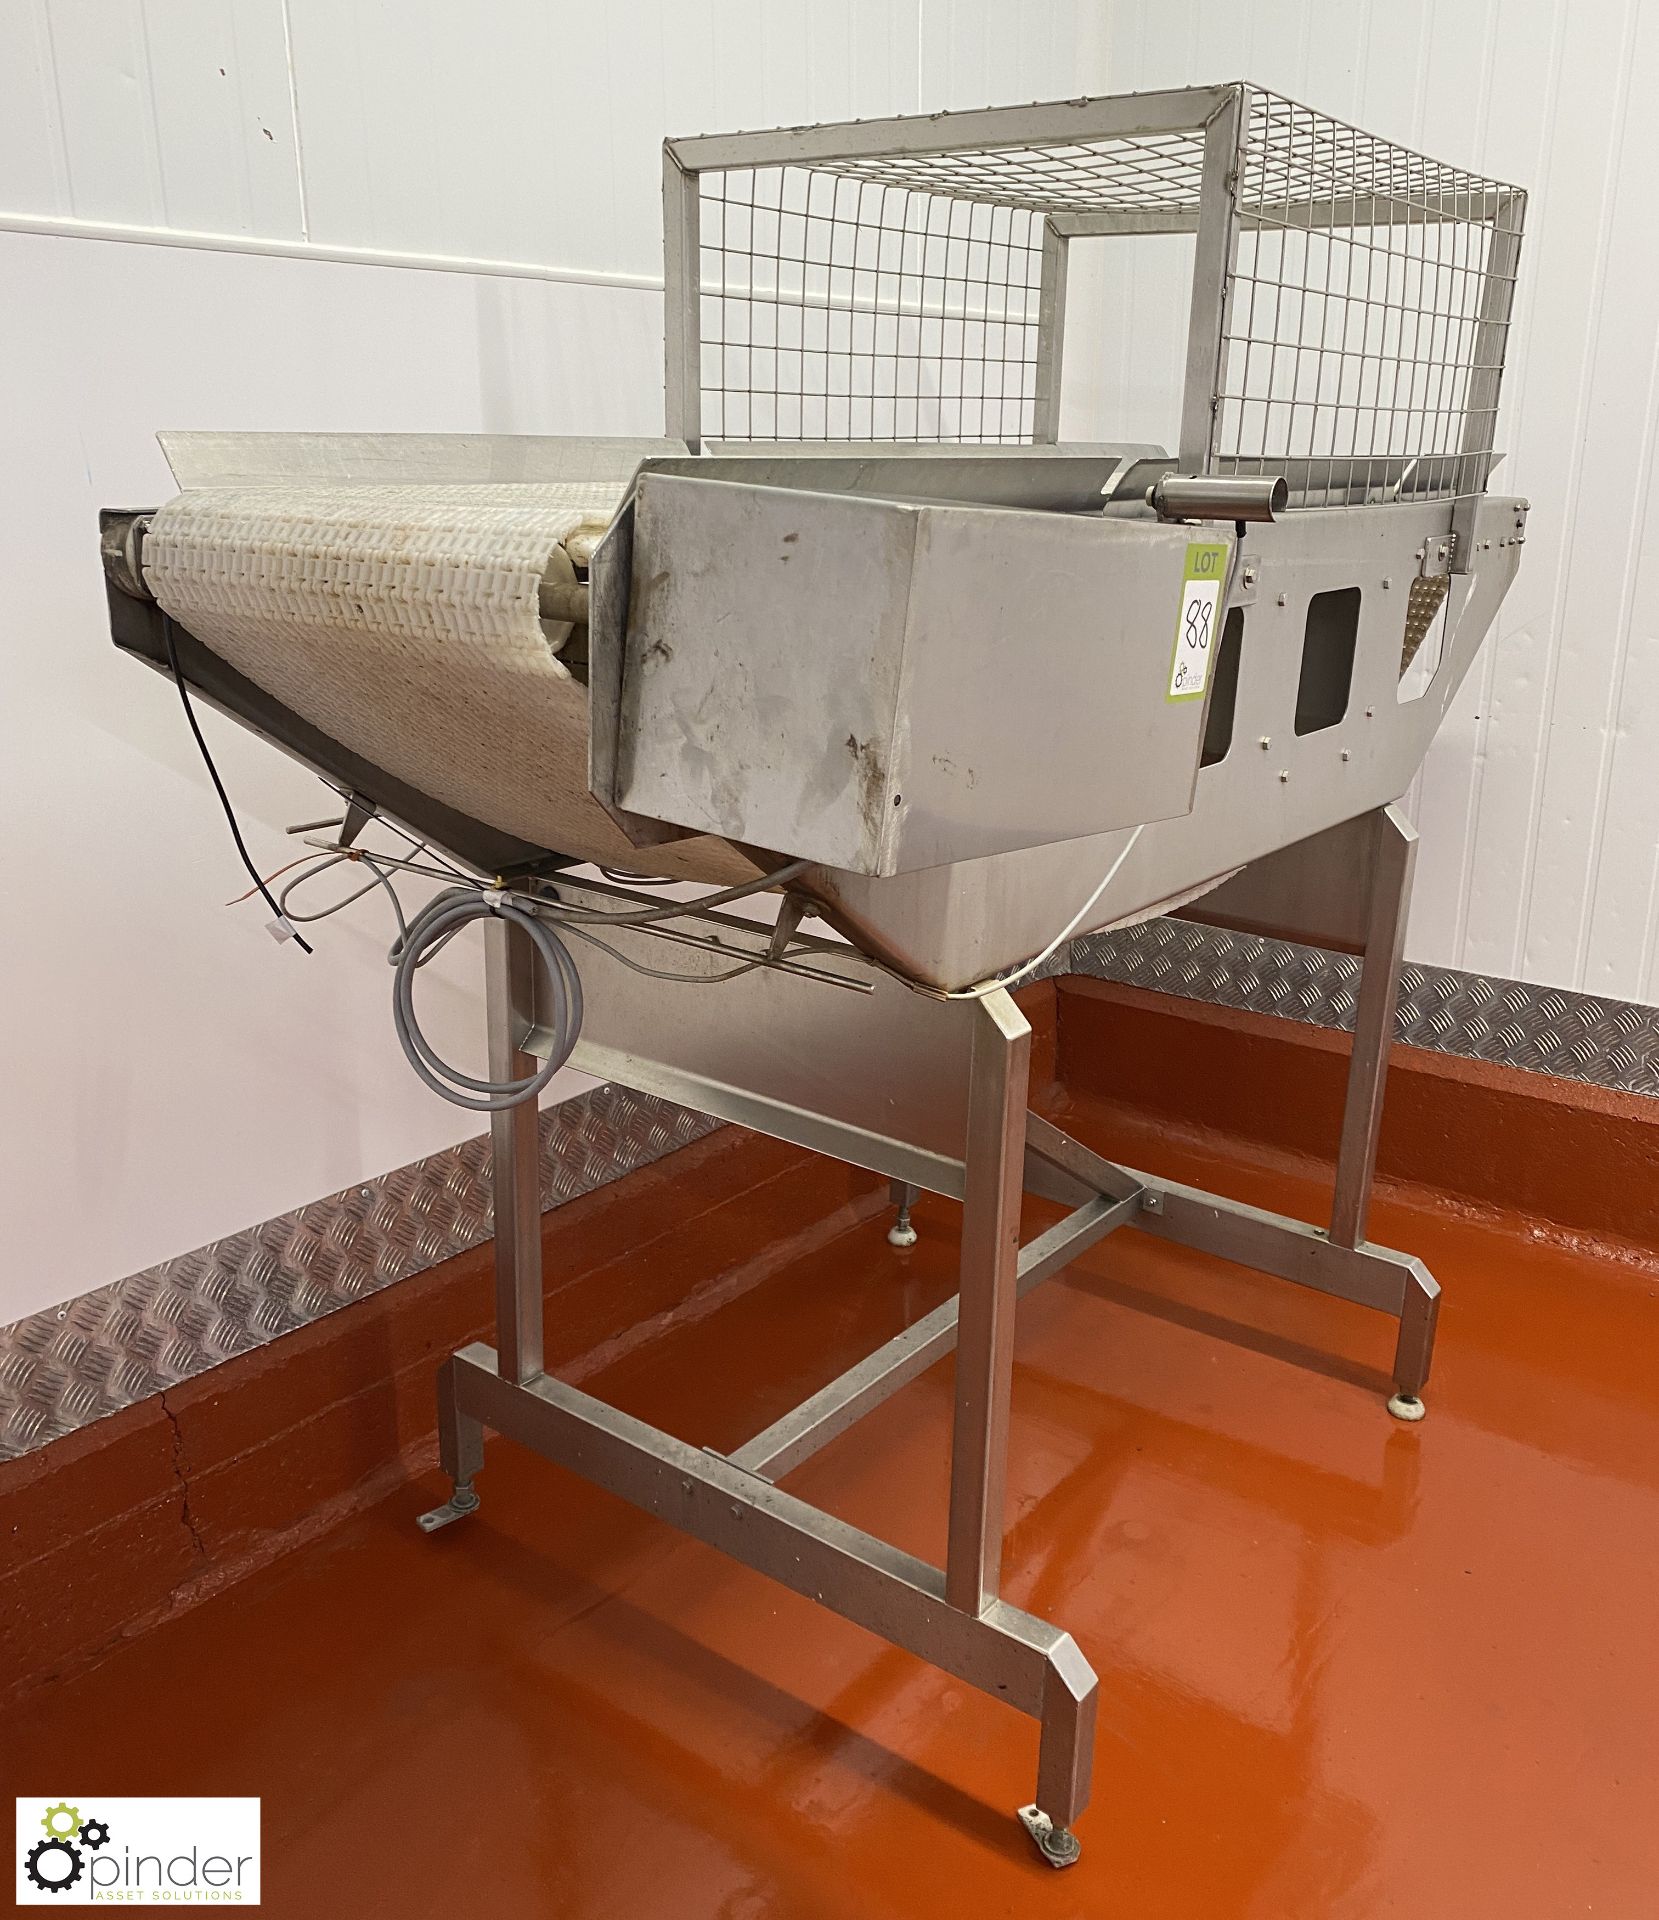 Stainless steel Conveyor System, 1900mm x 450mm, 400volts (Lift Out Fee: £30 plus VAT) - Image 2 of 4